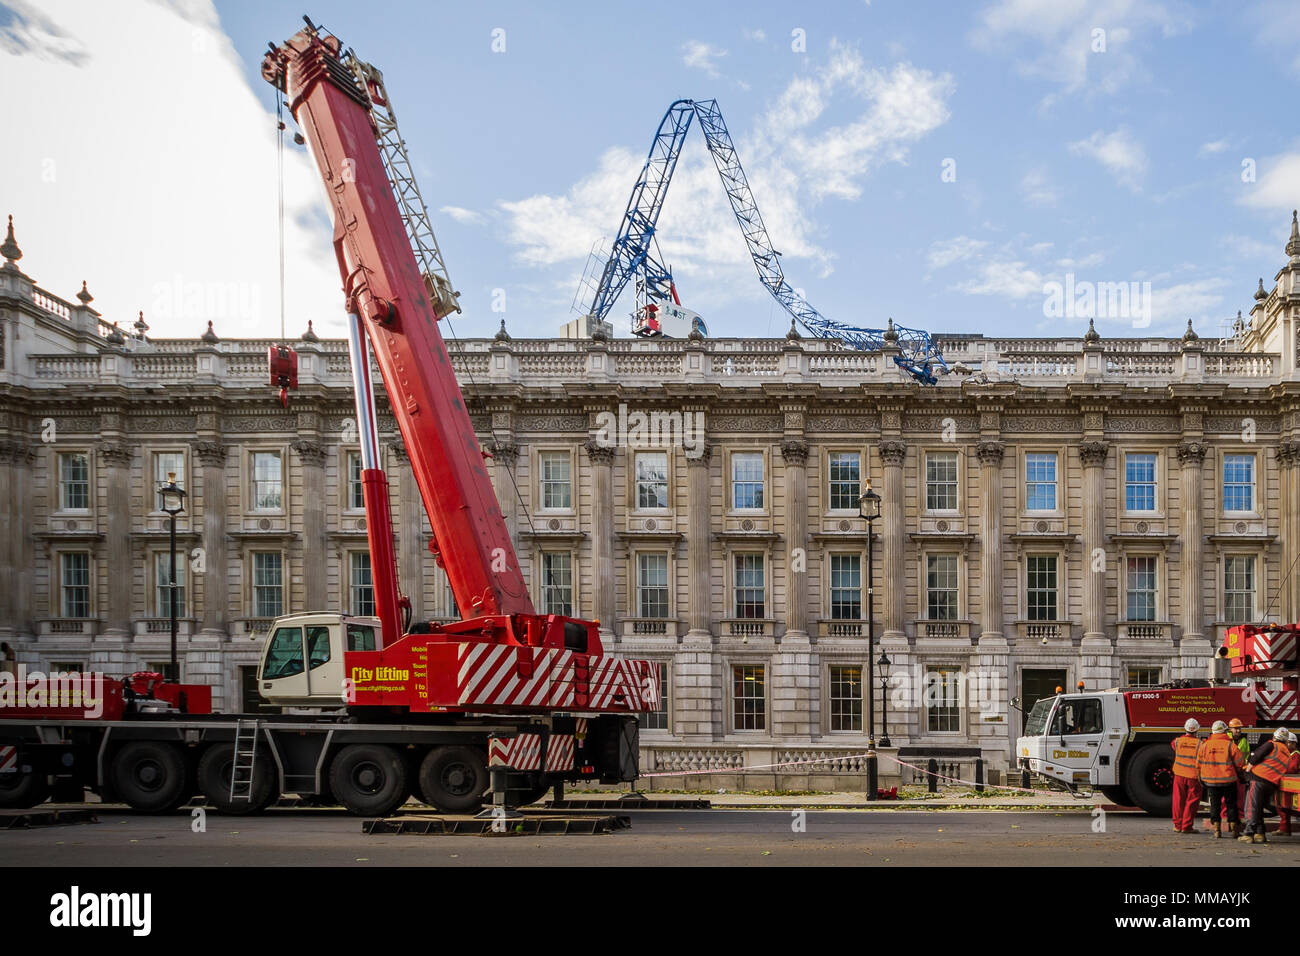 Storm damage: Buckled crane crashed on Cabinet Office roof in London, UK. Stock Photo